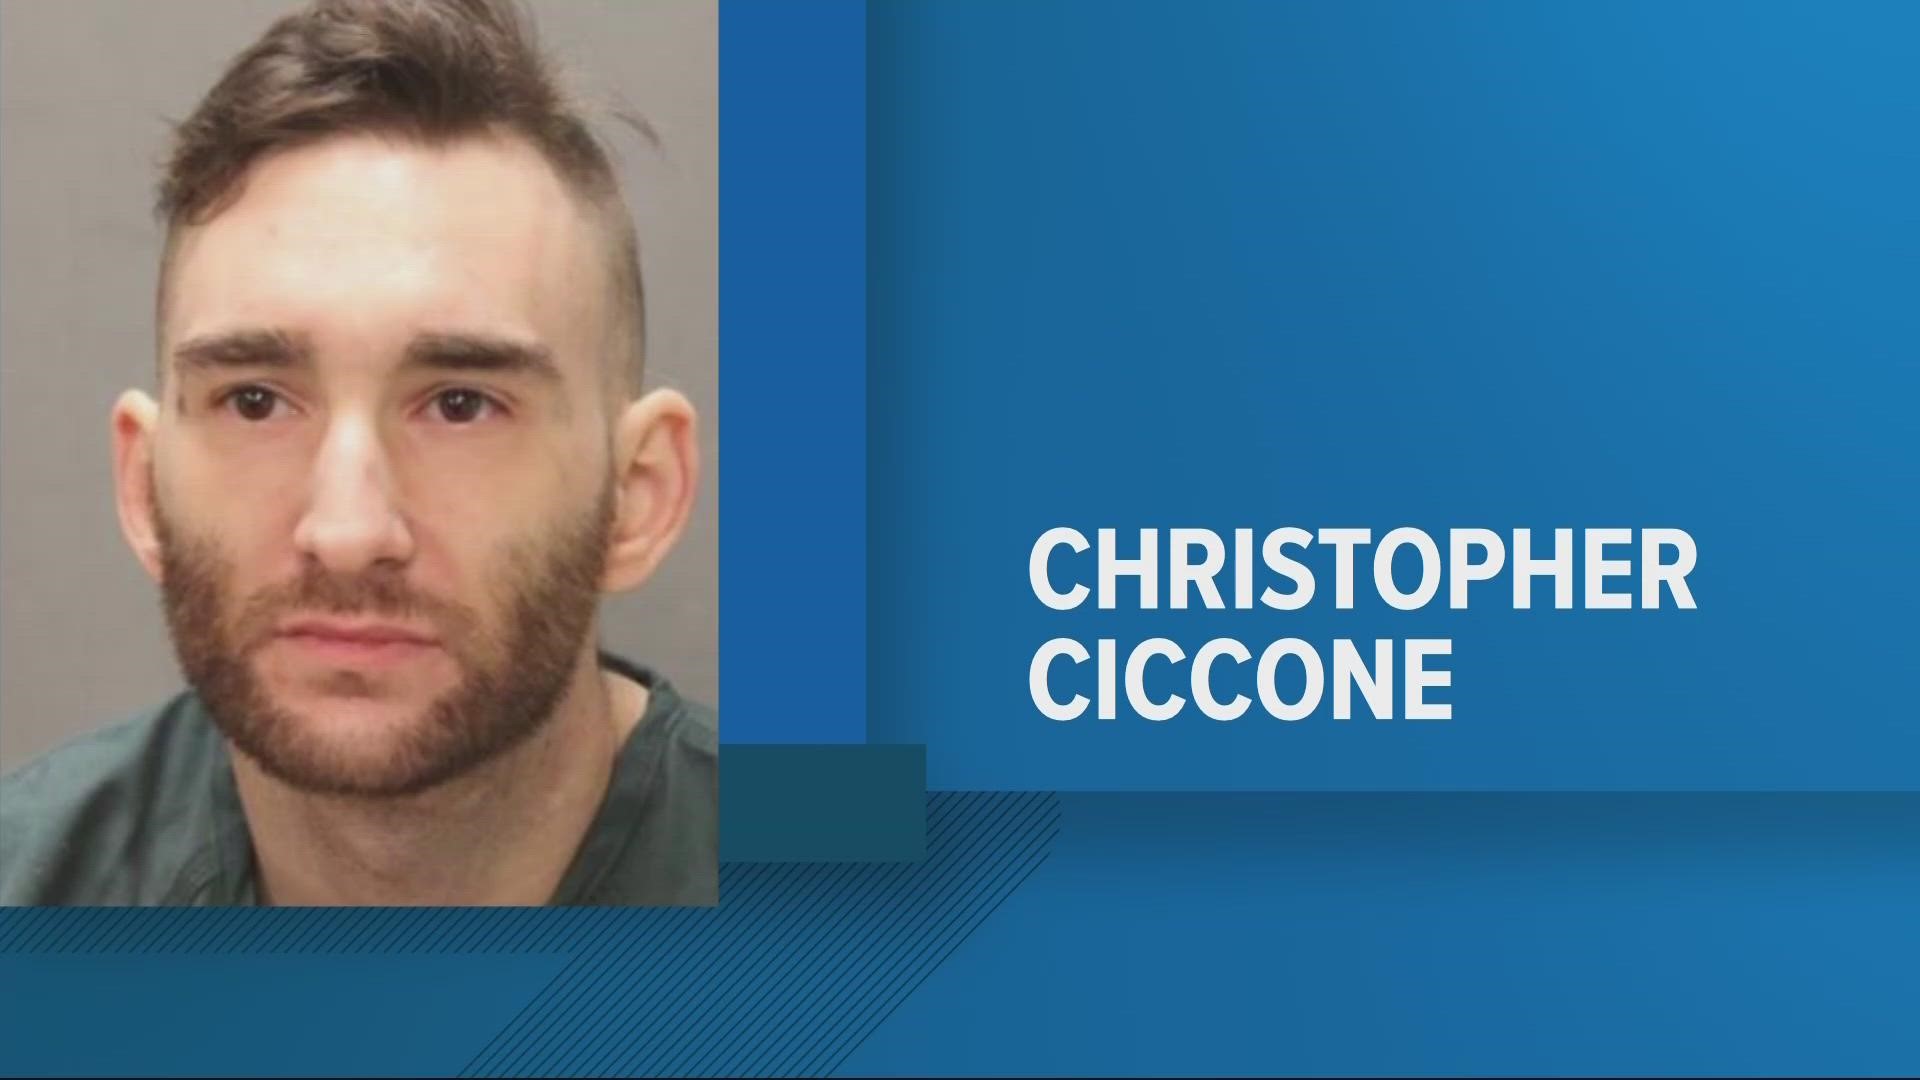 Christopher Ciccone was arrested on charges of sending written threats to conduct a mass shooting.